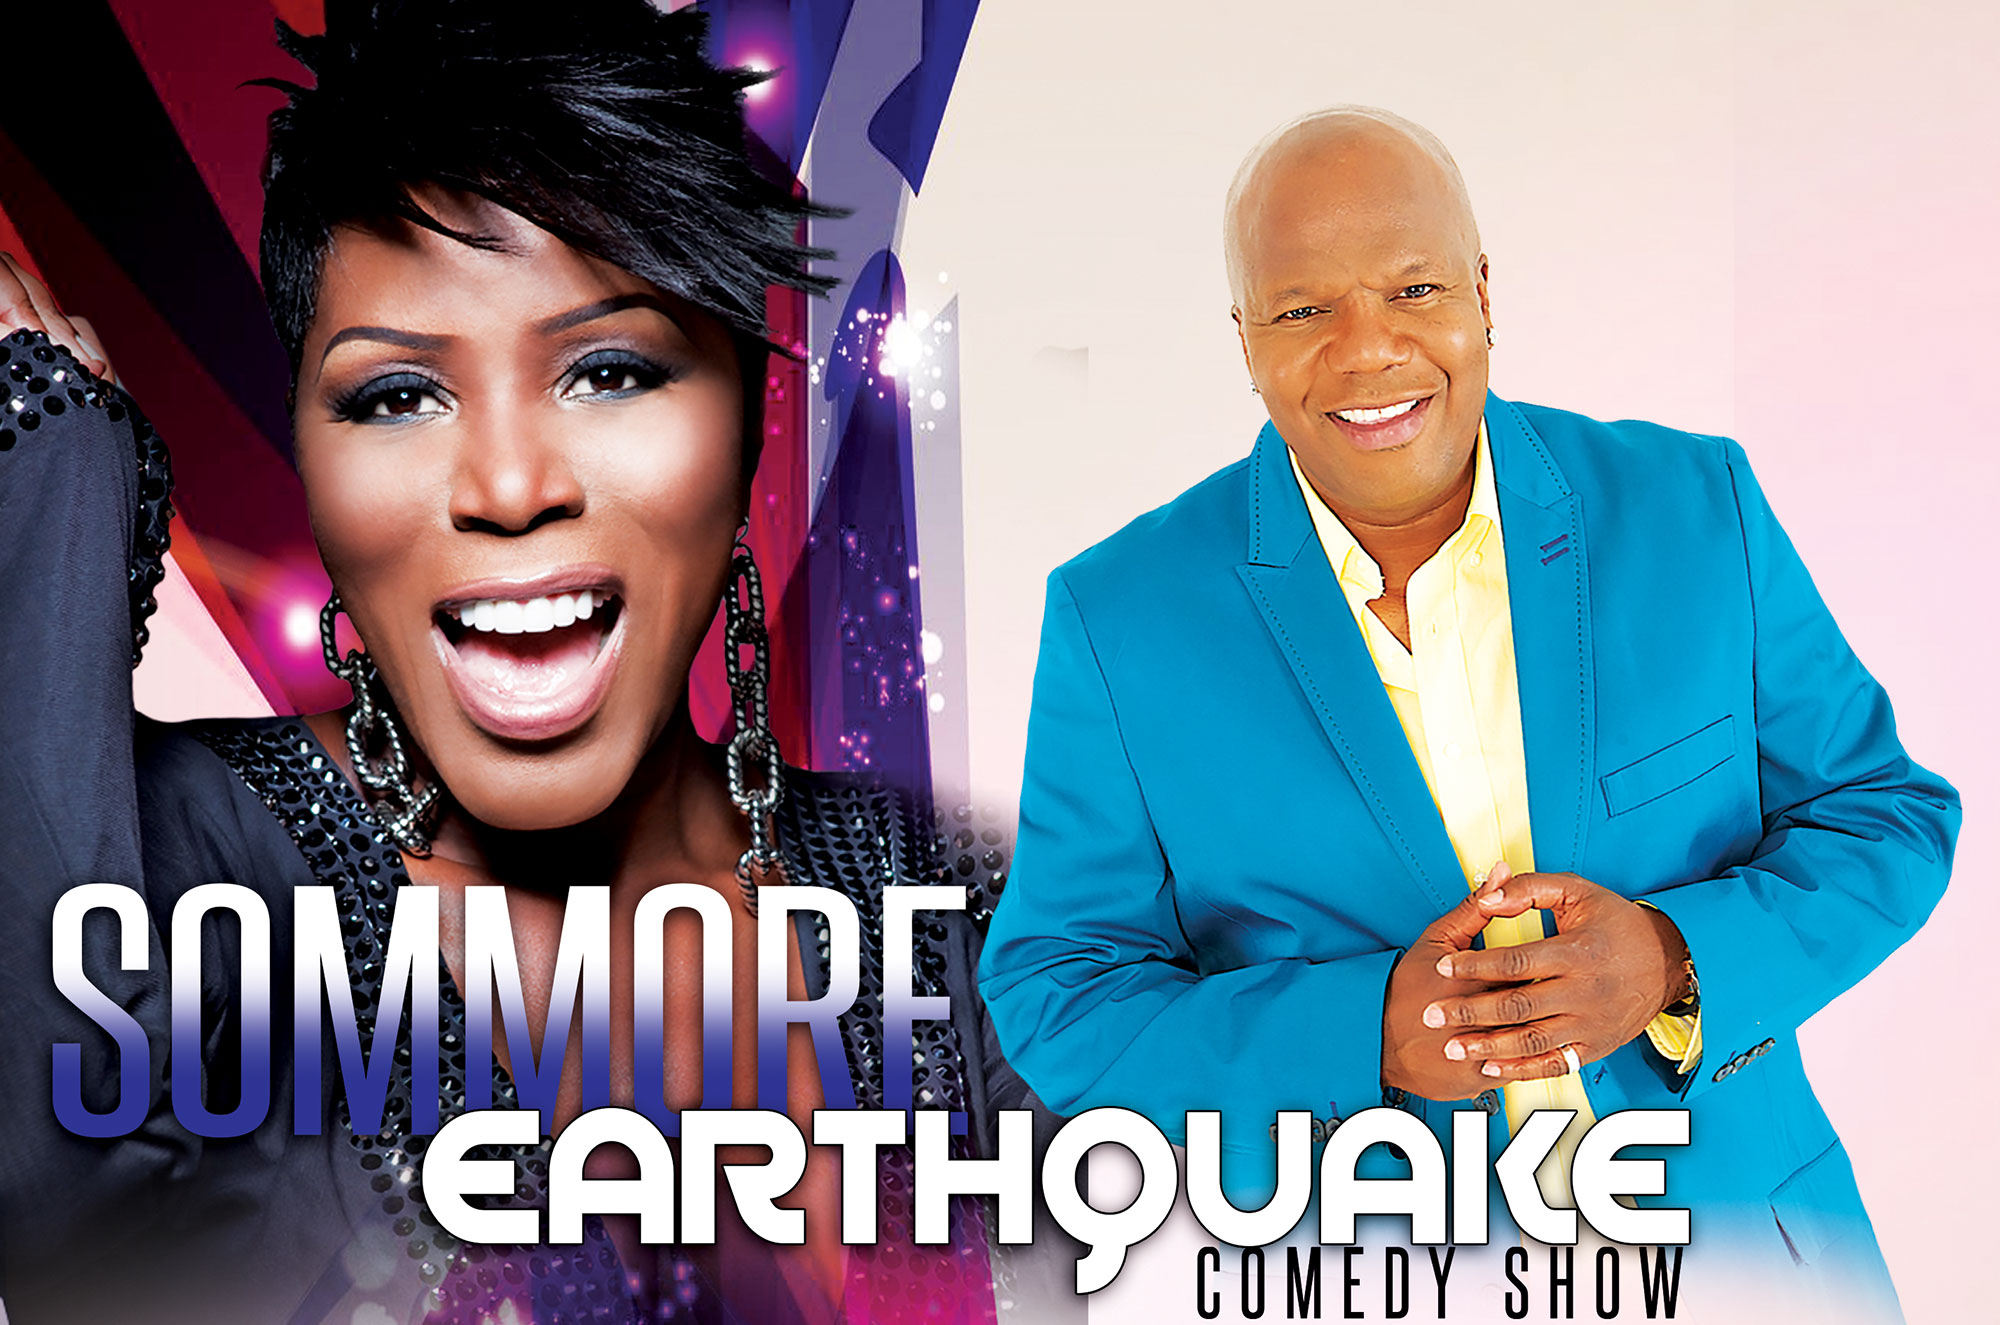 For what’s sure to be a memorable night of comedy, come out for the Sommore &